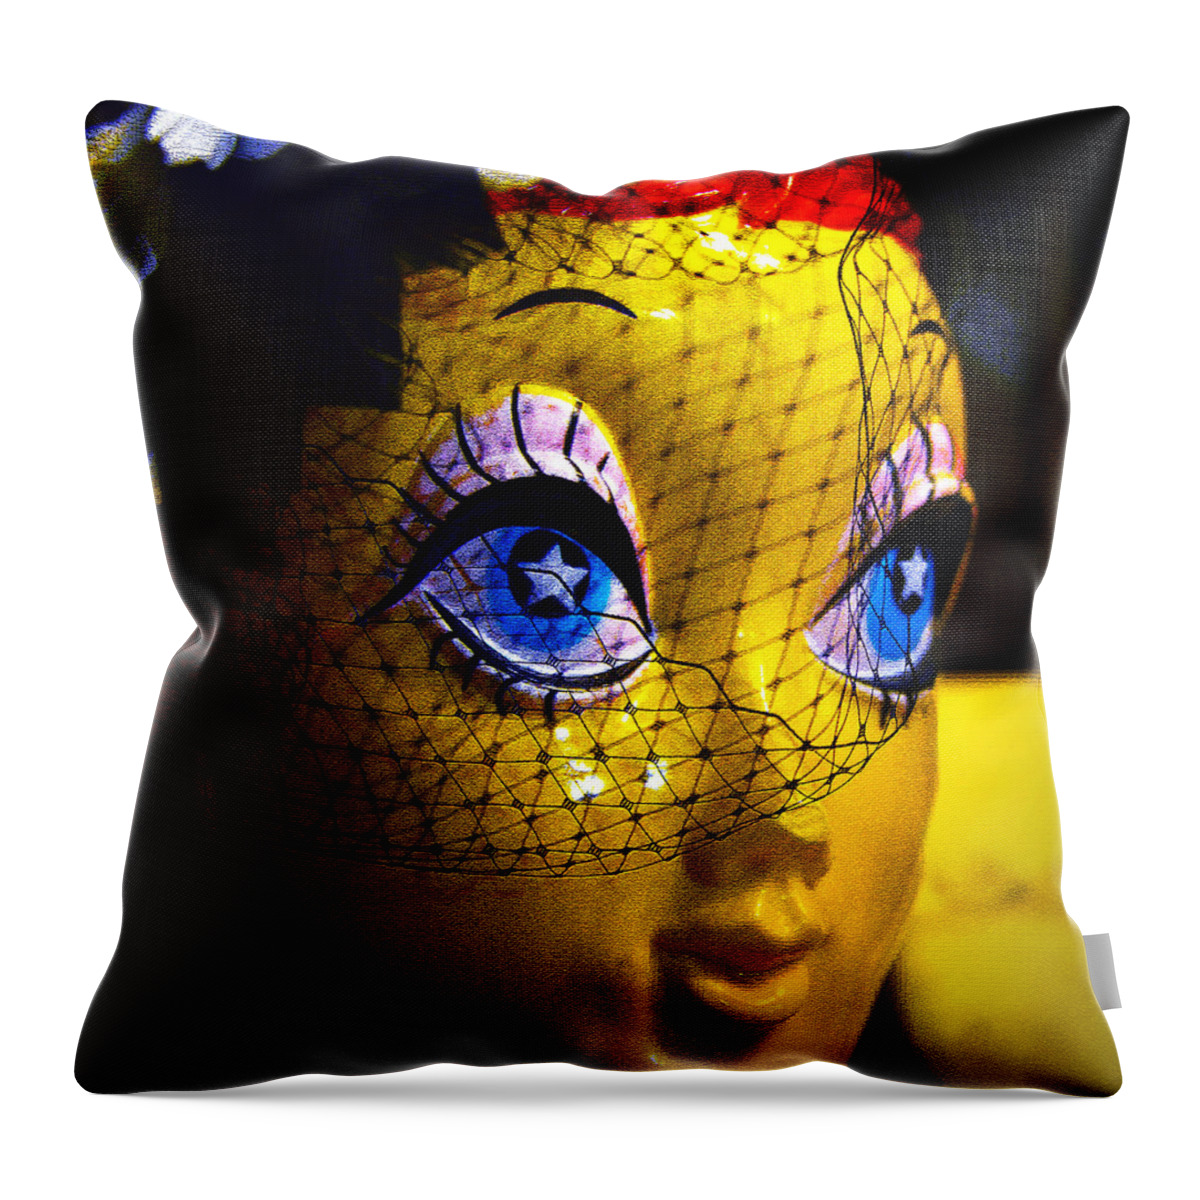 Starry Eyed Throw Pillow featuring the photograph Starry Eyed by David Lee Thompson